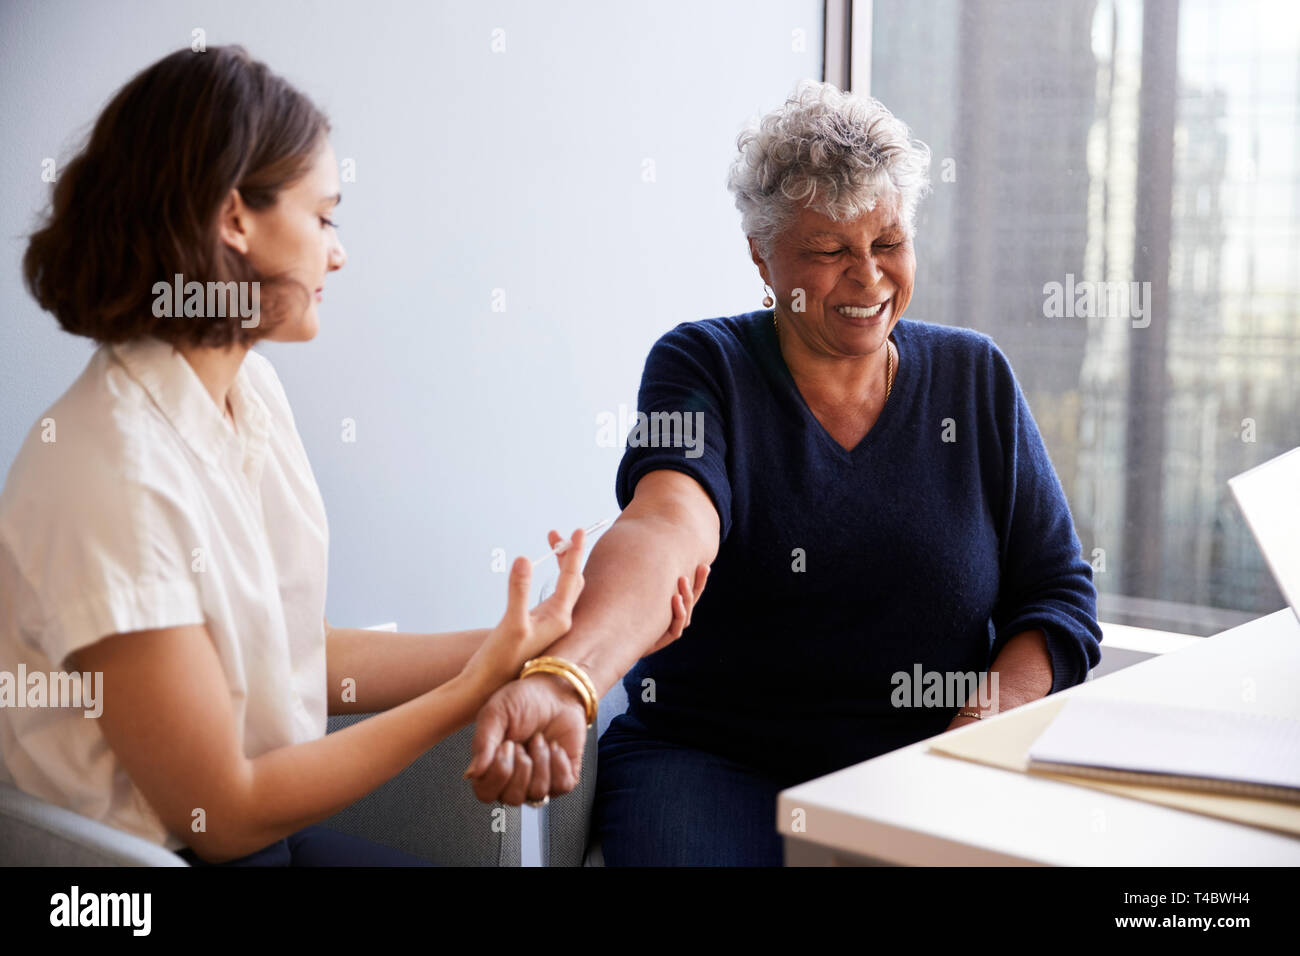 Senior Woman Being Vaccinated With Flu Jab By Female Doctor In Hospital Office Stock Photo